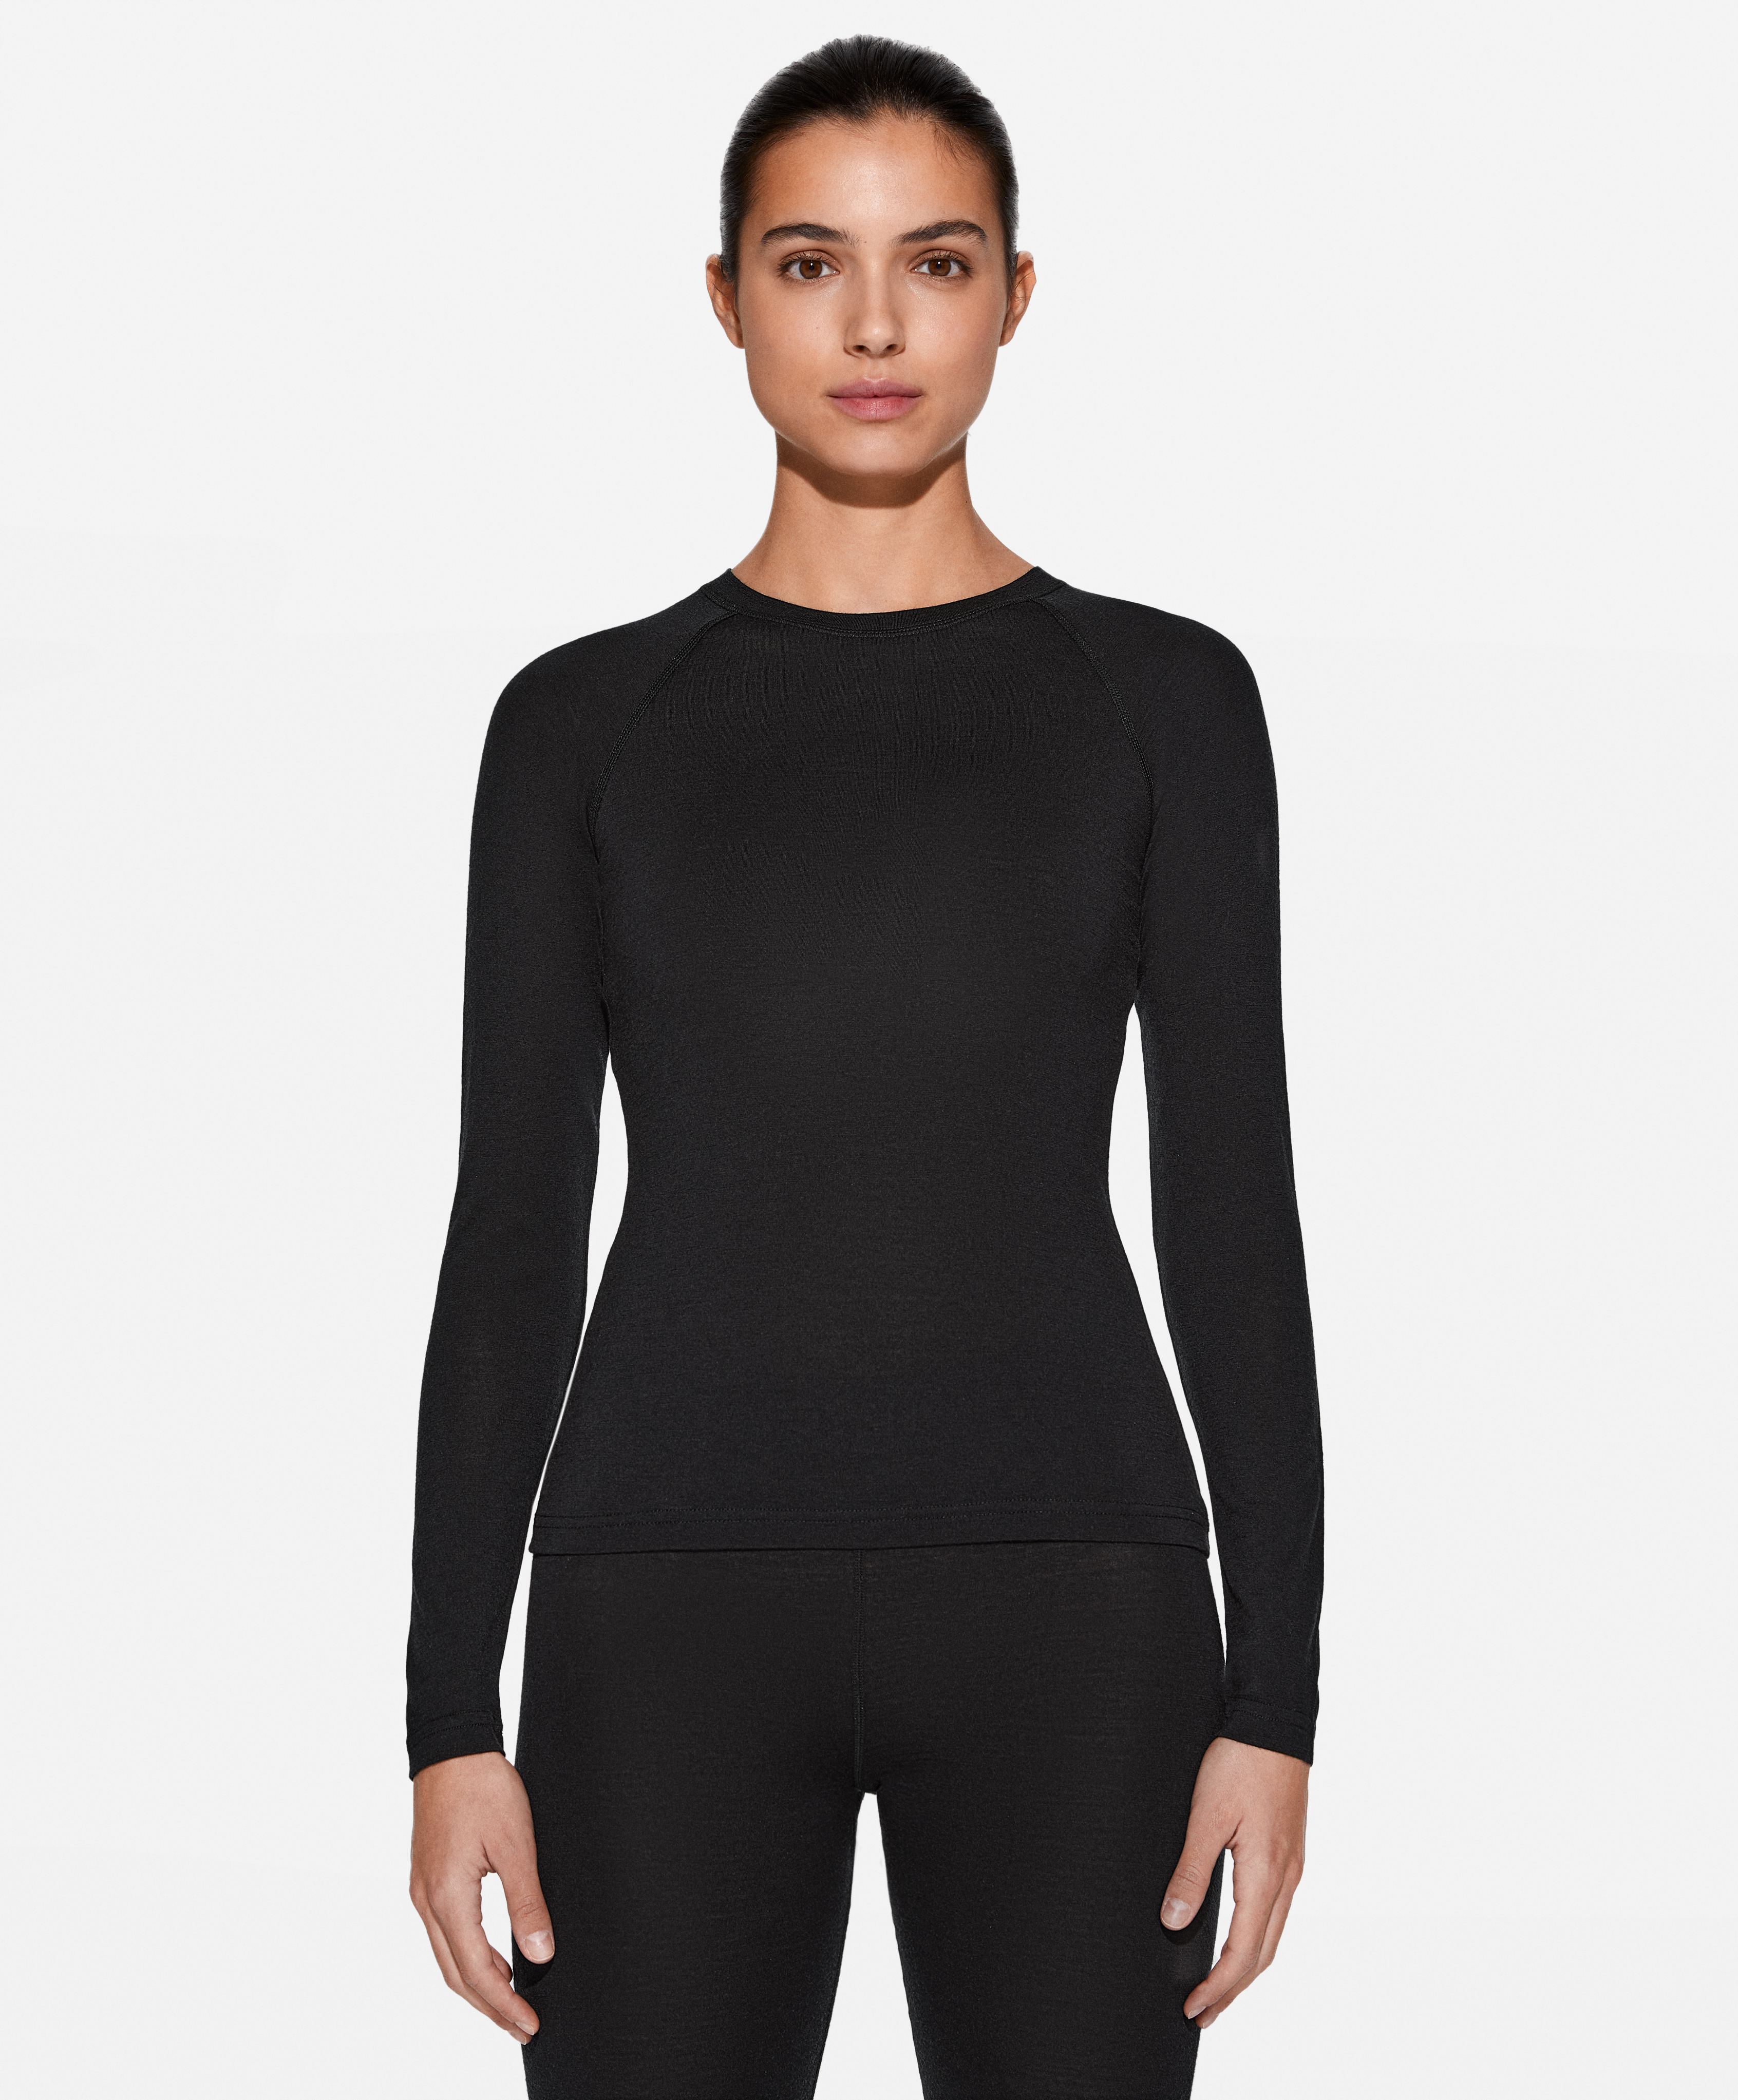 Super extra warmth long-sleeved technical top in 100% wool